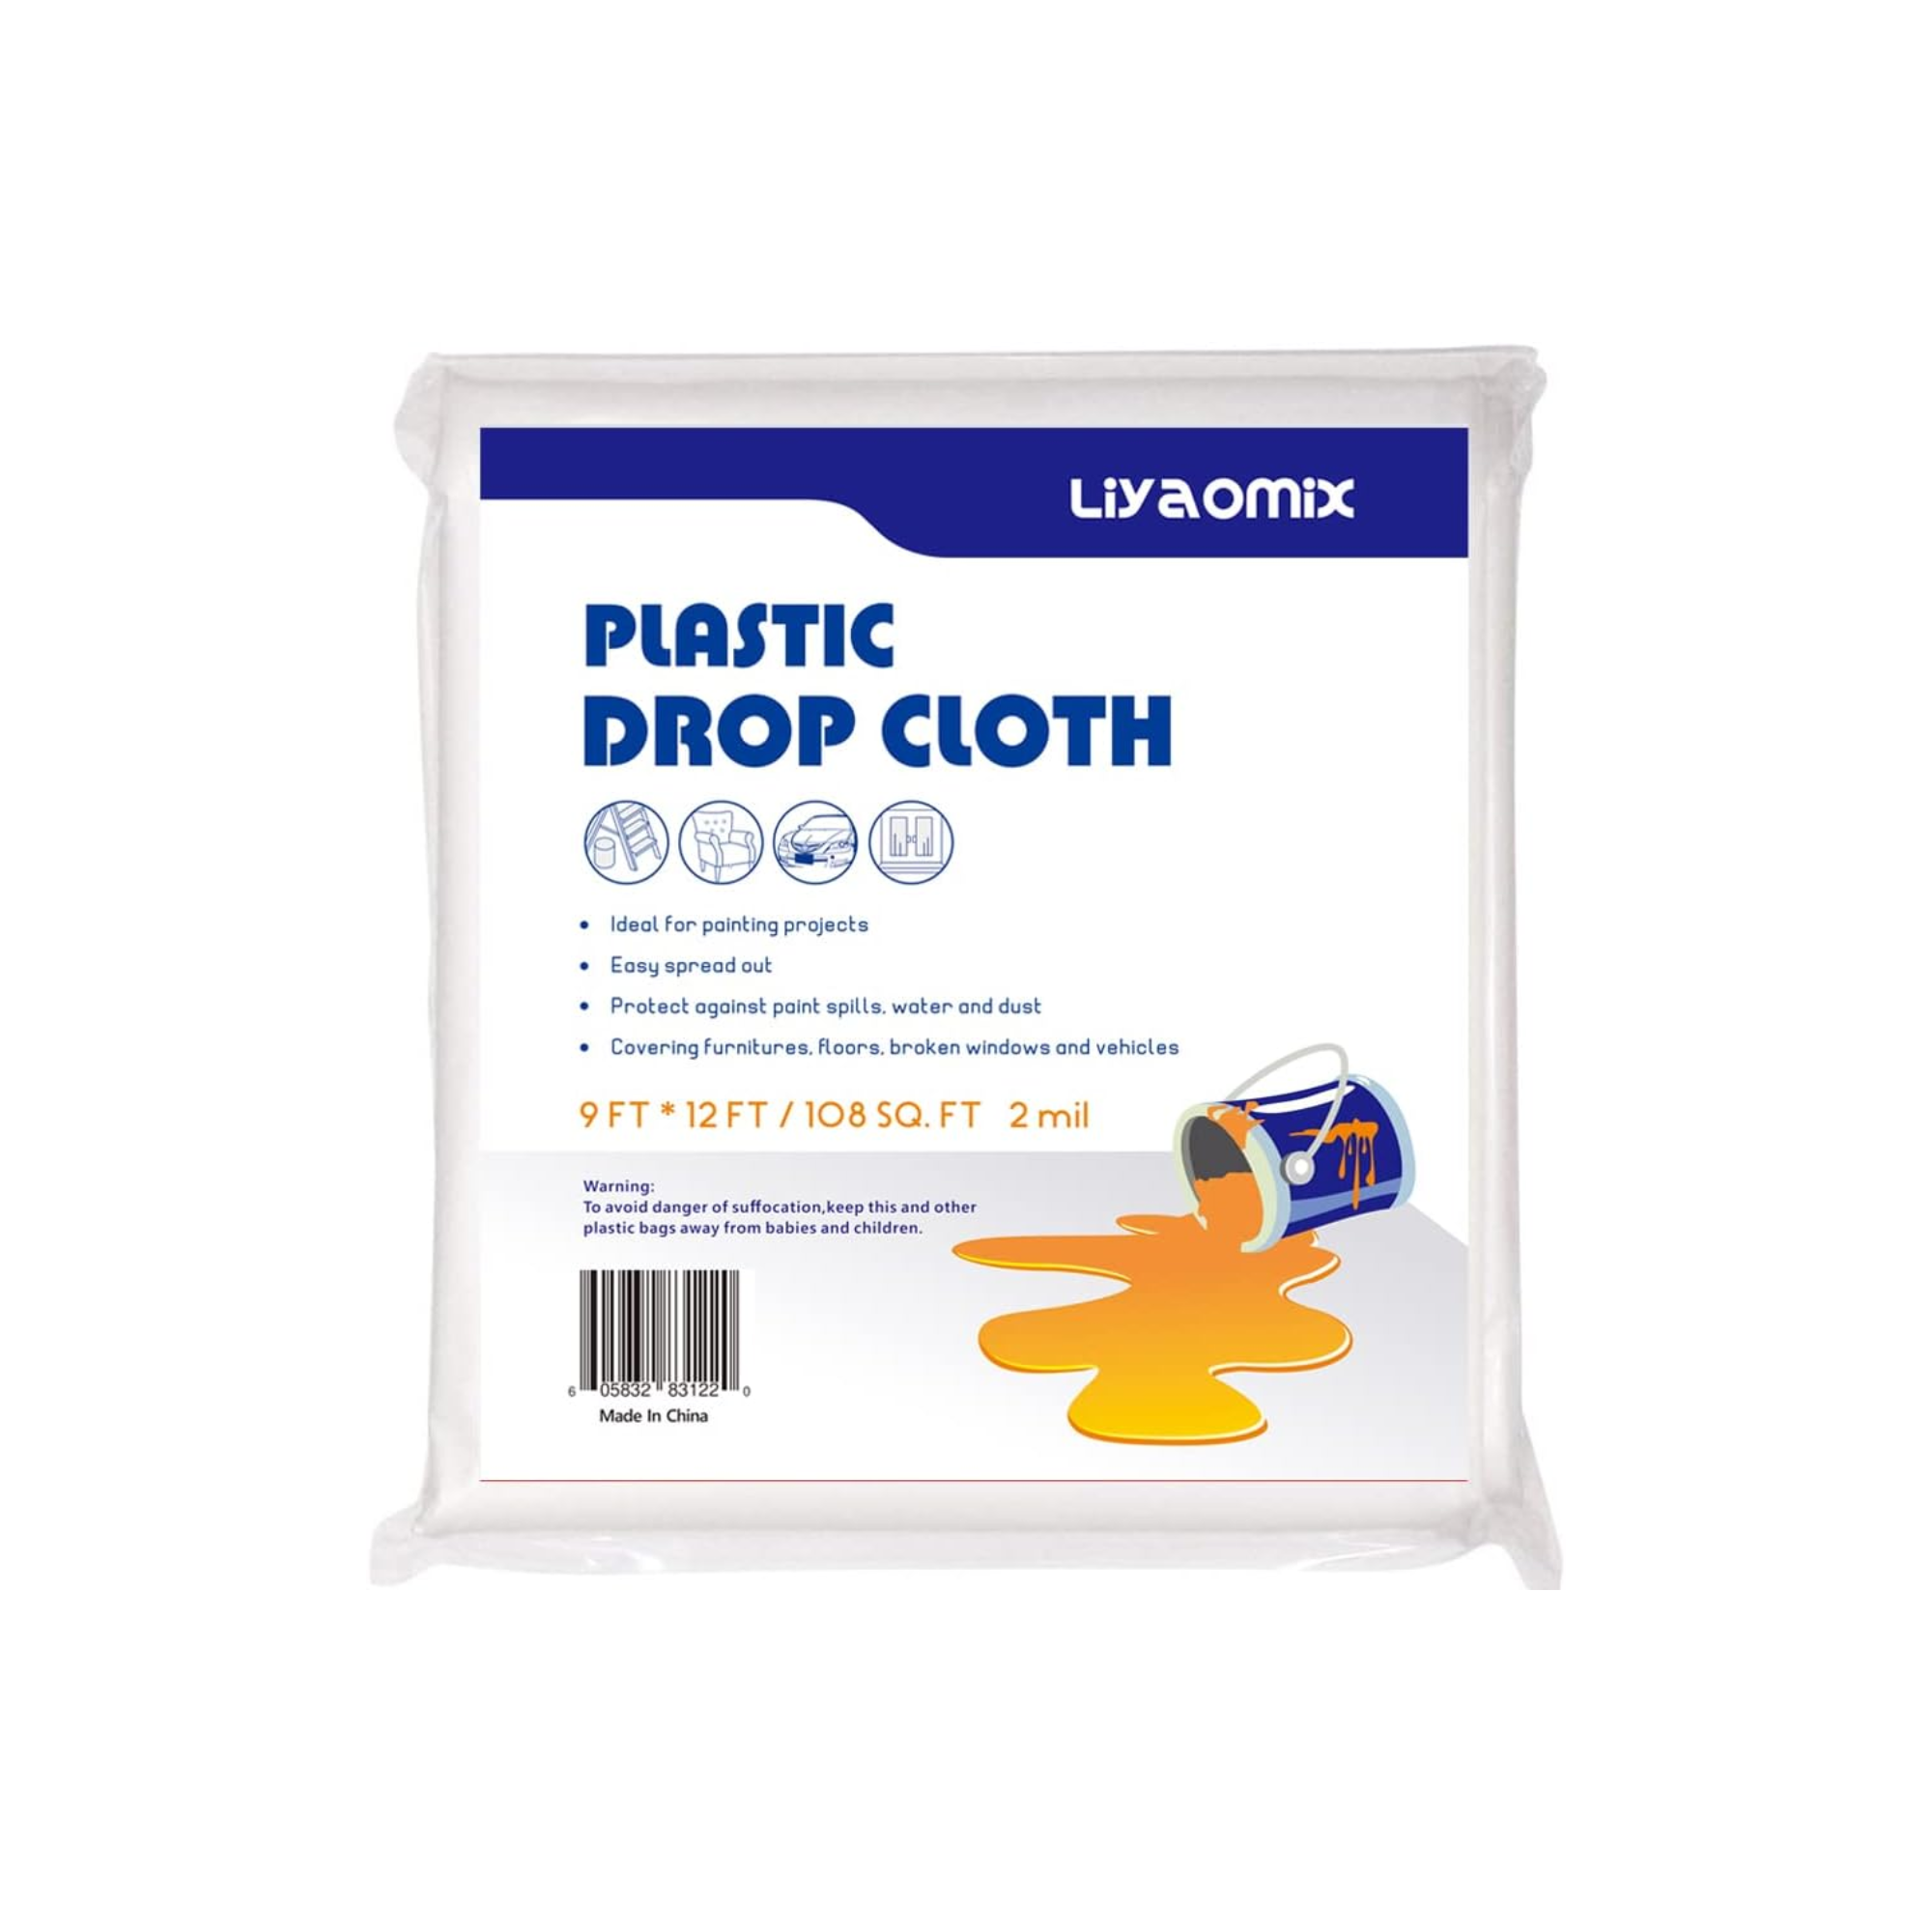 A pack of plastic painting drop cloths